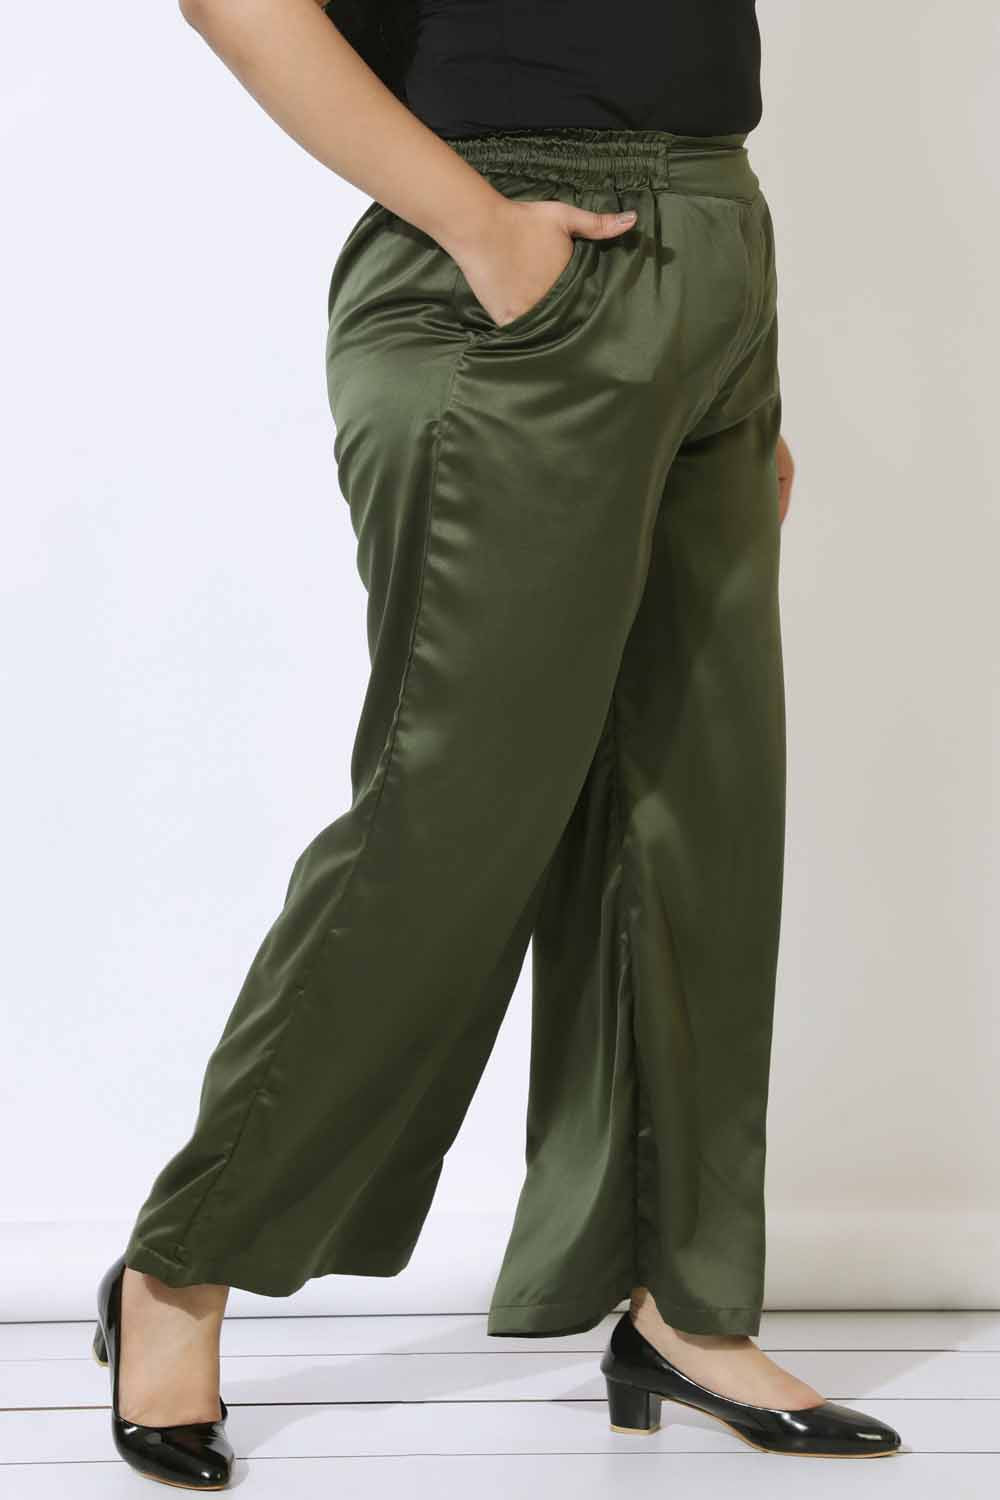 Plus Size Olive Satin High Waist Pants for Women